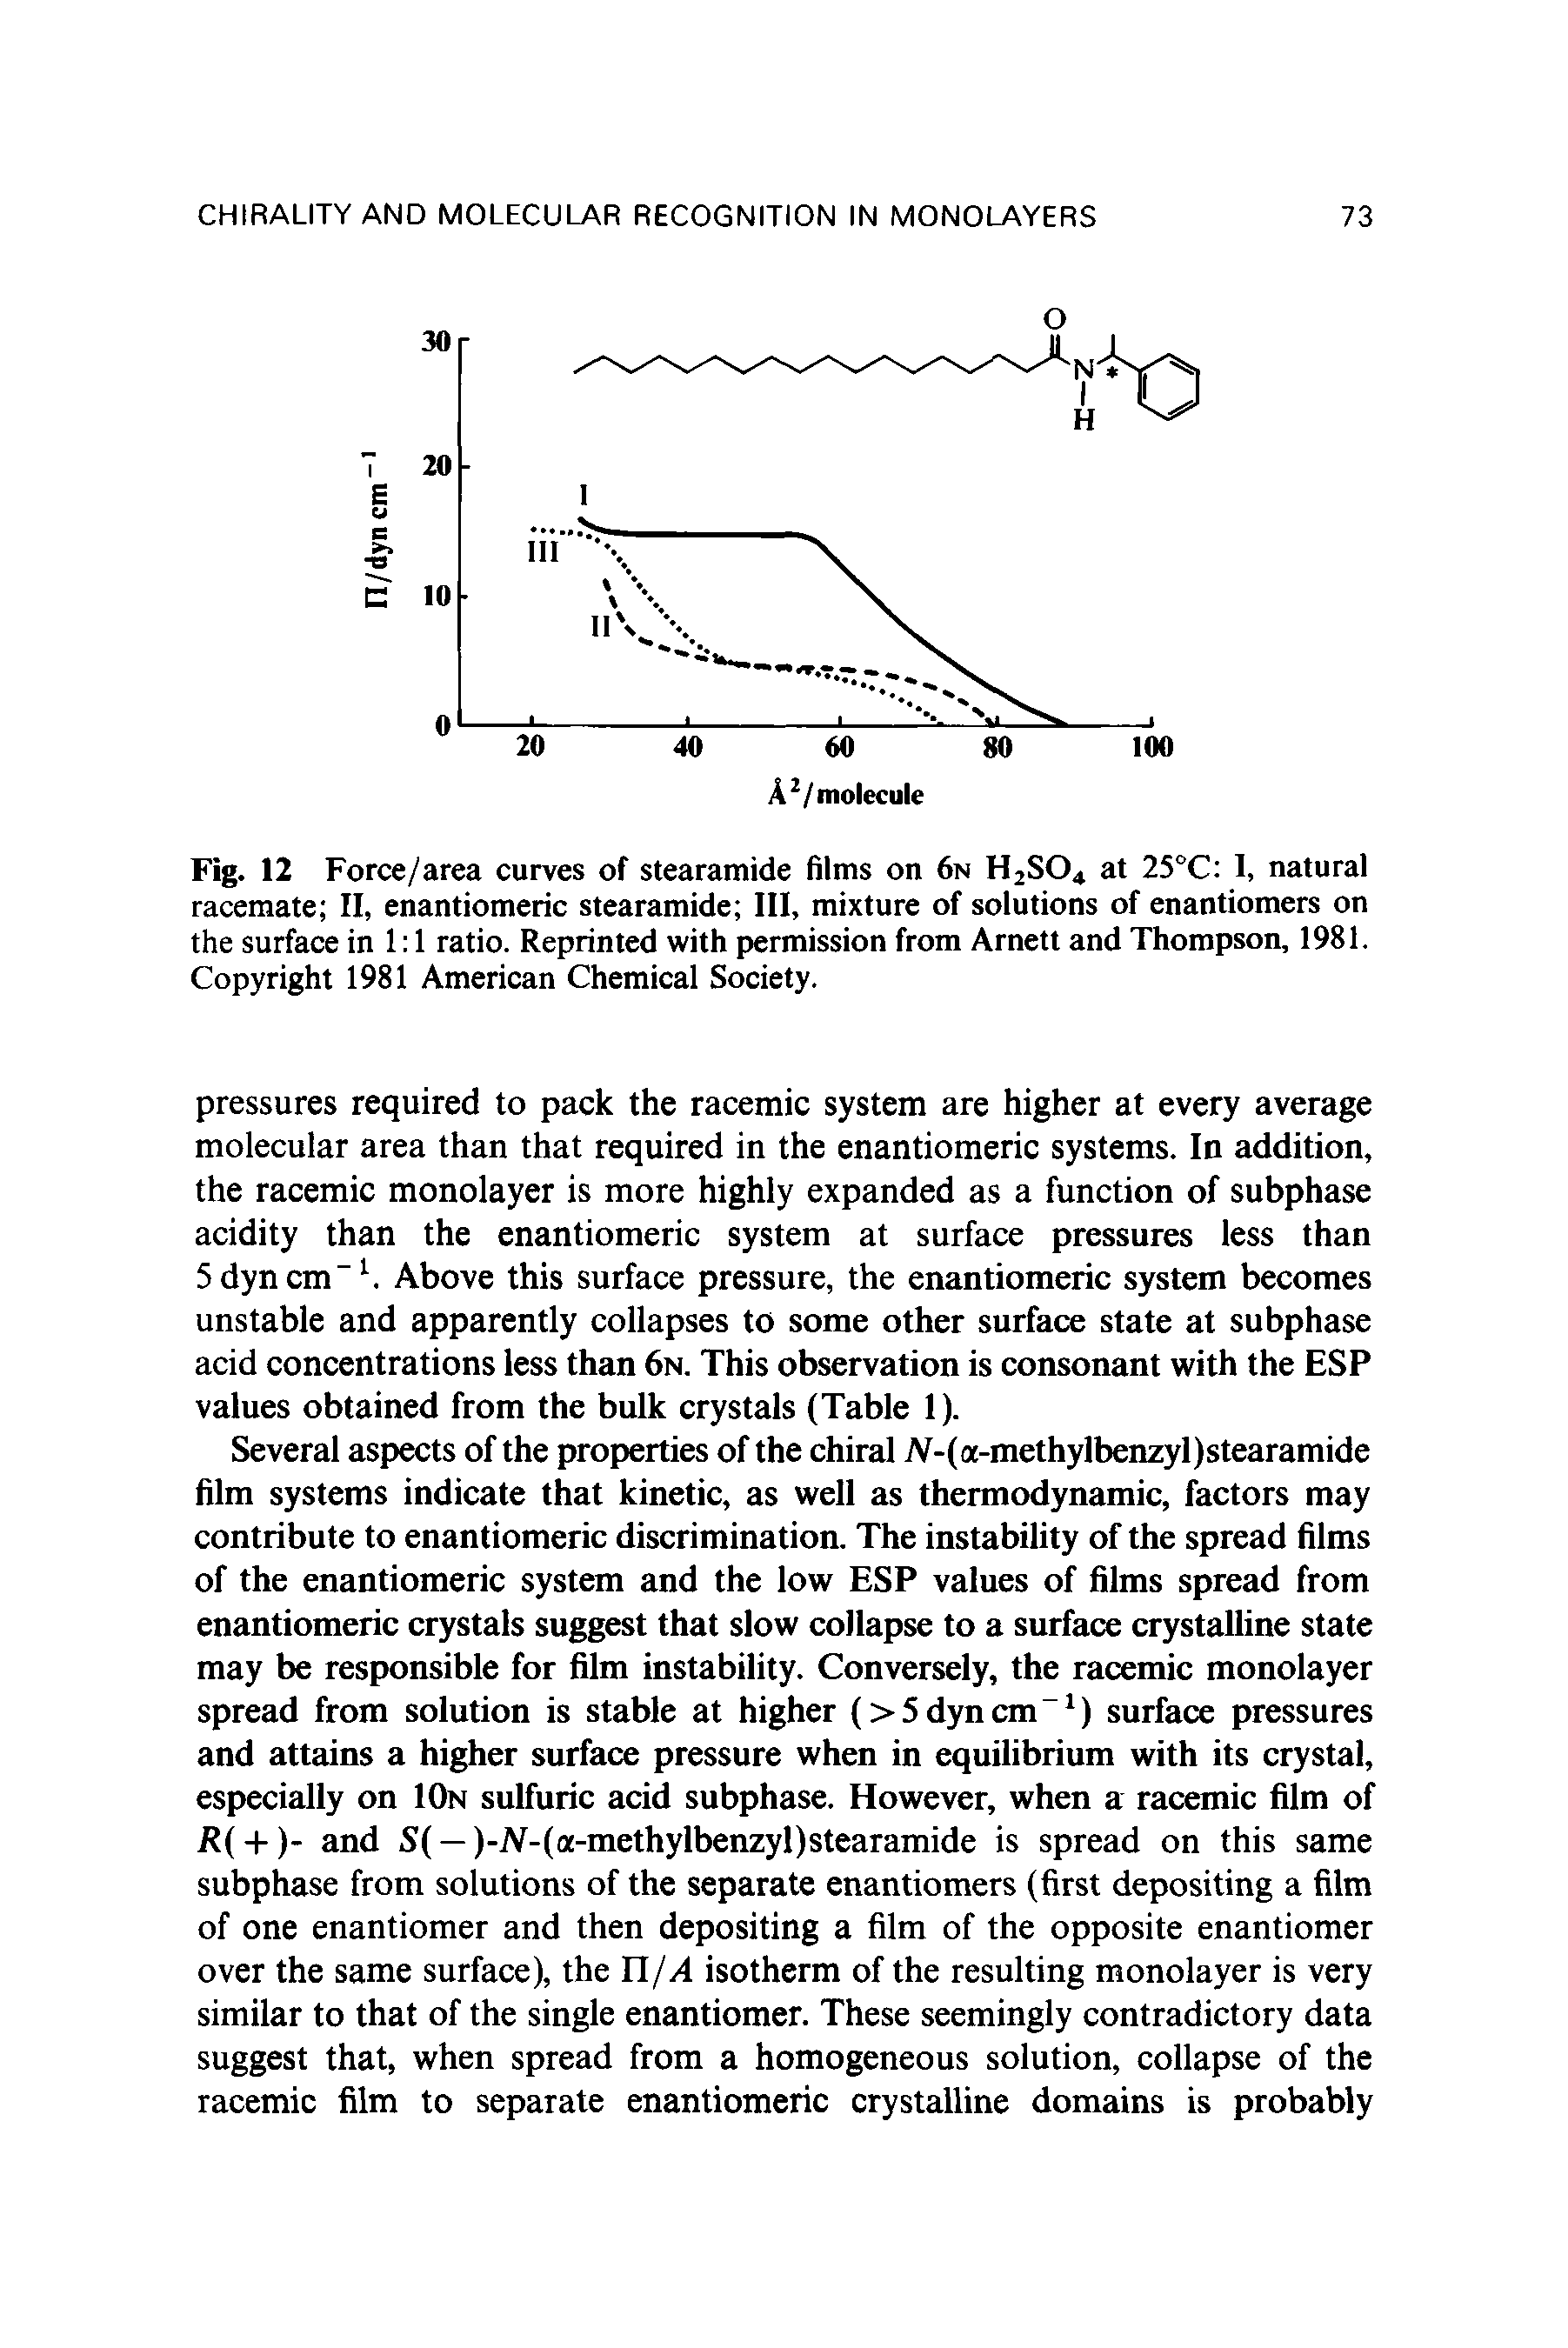 Fig. 12 Force/area curves of stearamide films on 6n H2S04 at 25°C 1, natural racemate II, enantiomeric stearamide III, mixture of solutions of enantiomers on the surface in 1 1 ratio. Reprinted with permission from Arnett and Thompson, 1981. Copyright 1981 American Chemical Society.